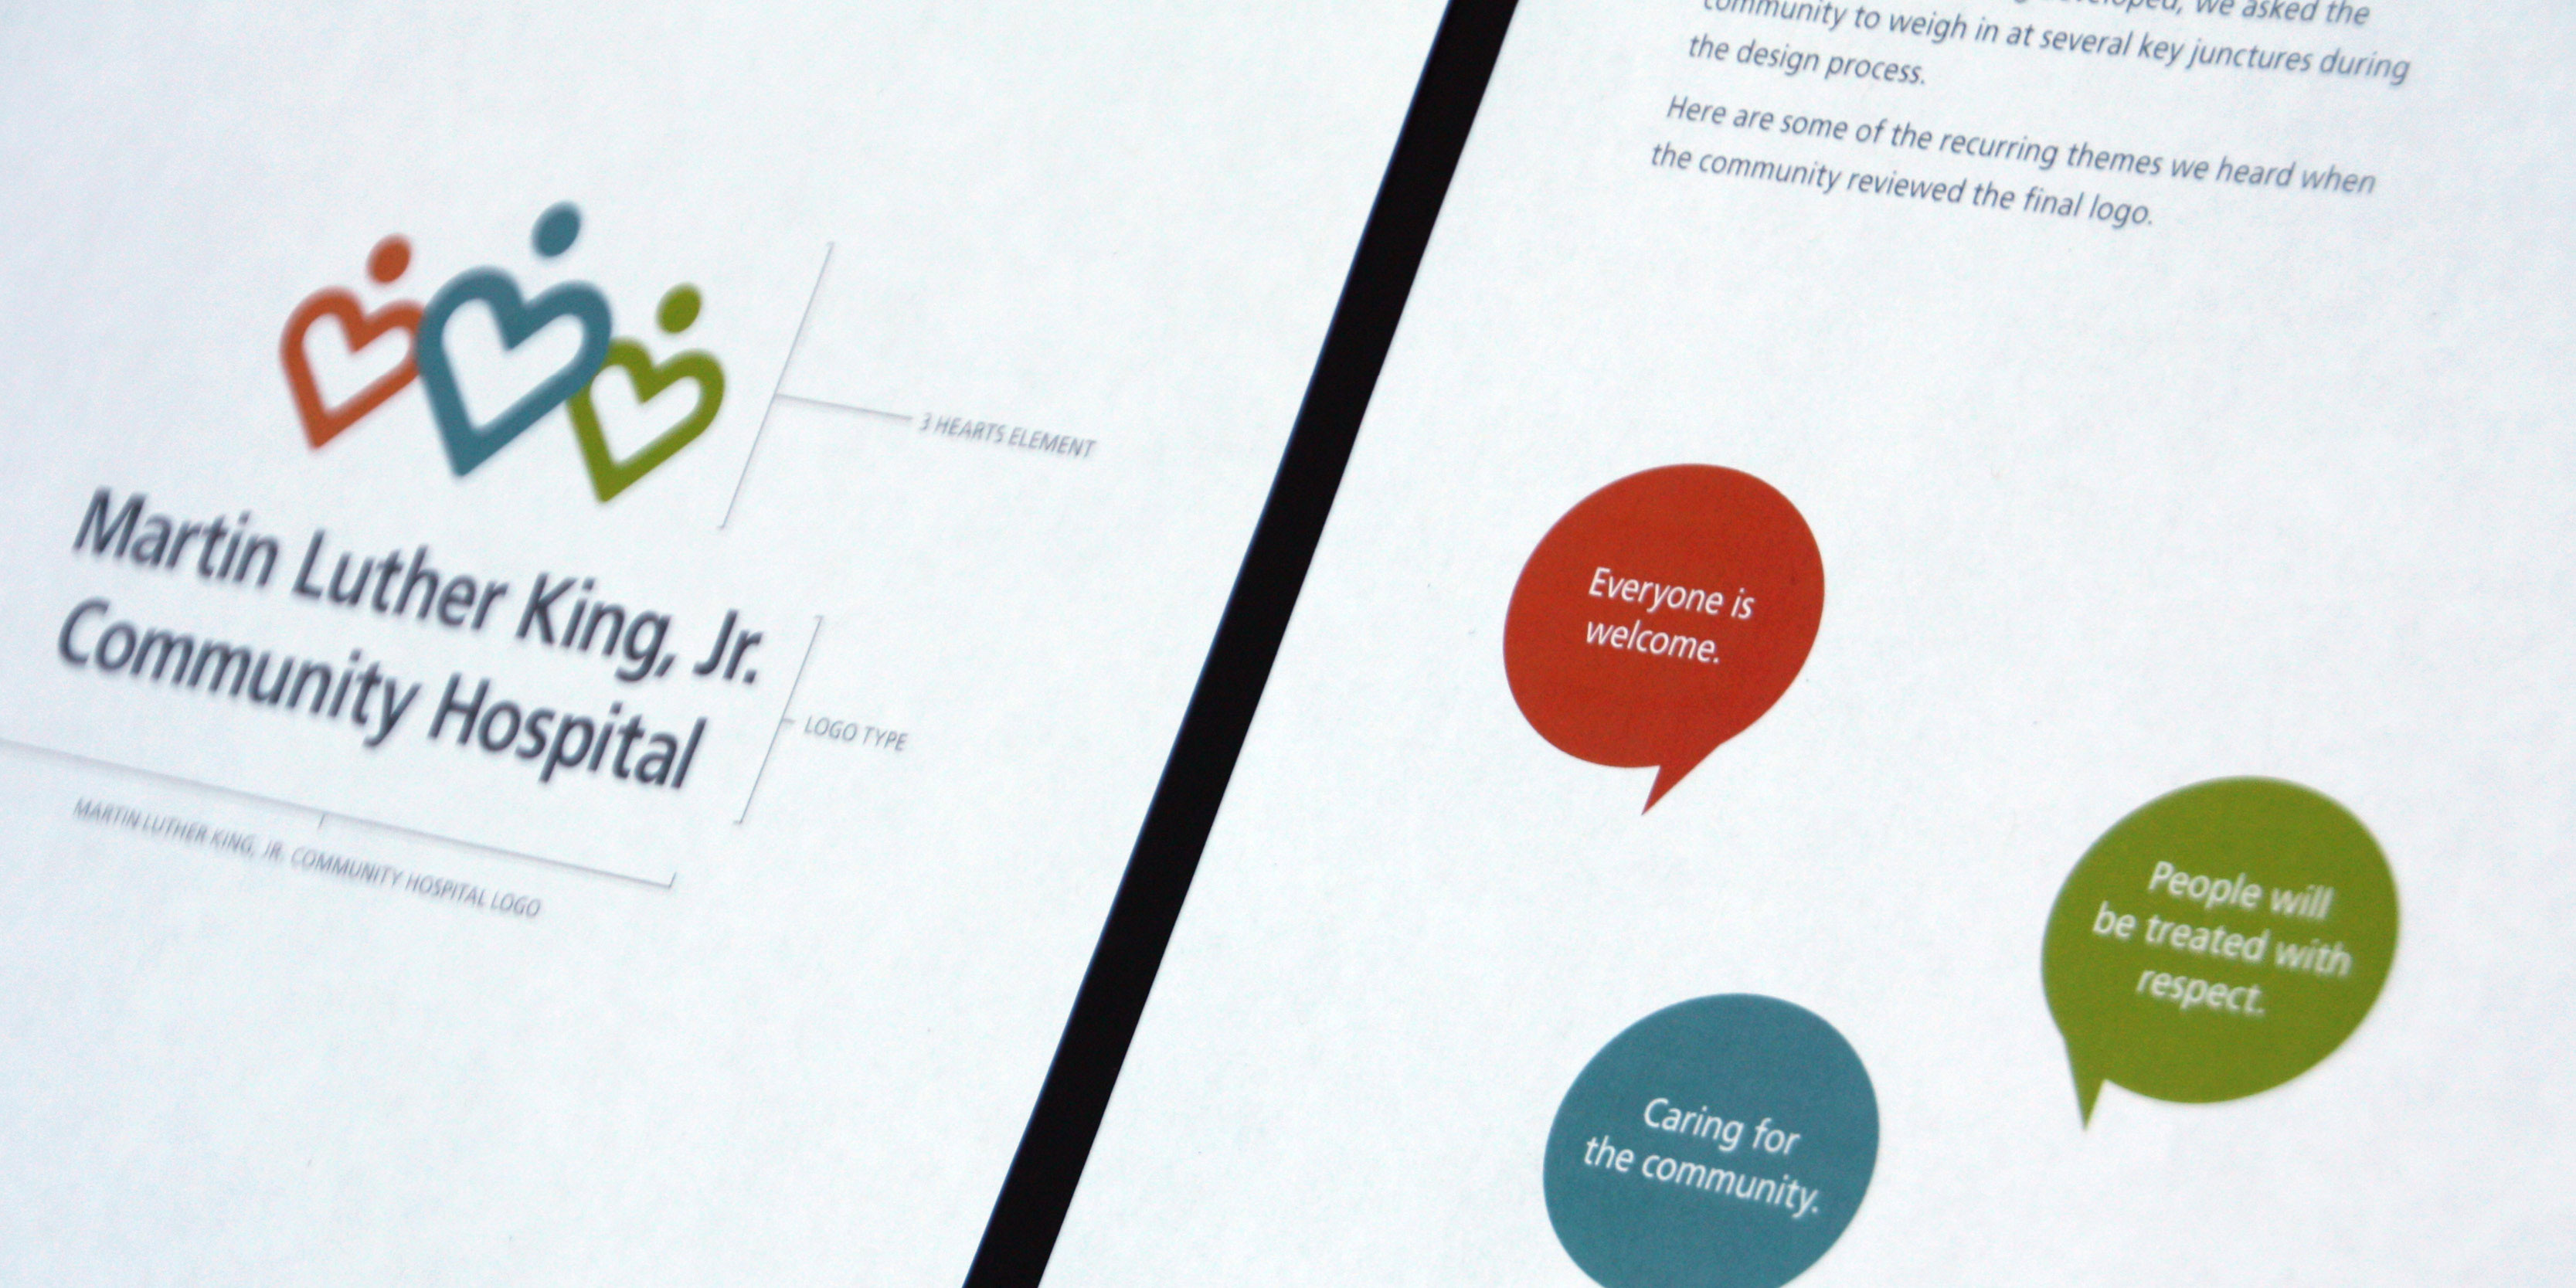 KBDA developed a communications style guide to help MLKCH's internal team/partners ensure consistency of messaging and tone throughout all branded materials.